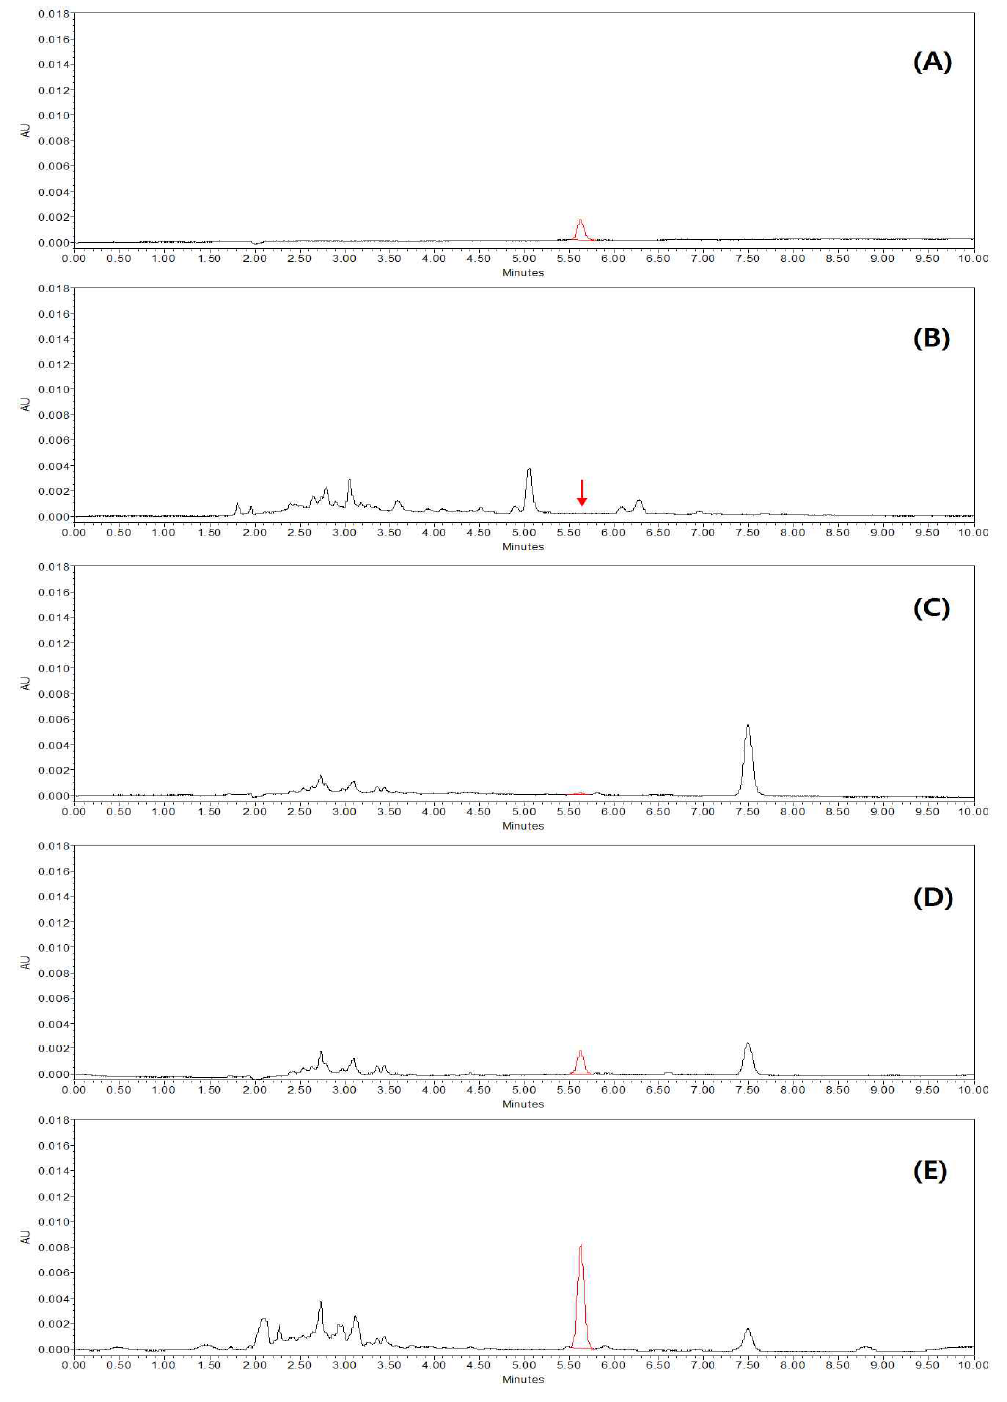 HPLC-UV chromatograms corresponding to: A, standard solution at 0.1 mg/kg; B, control pepper; C, spiked at 0.01 mg/kg; D, spiked at 0.1 mg/kg; and E, spiked at 0.5 mg/kg